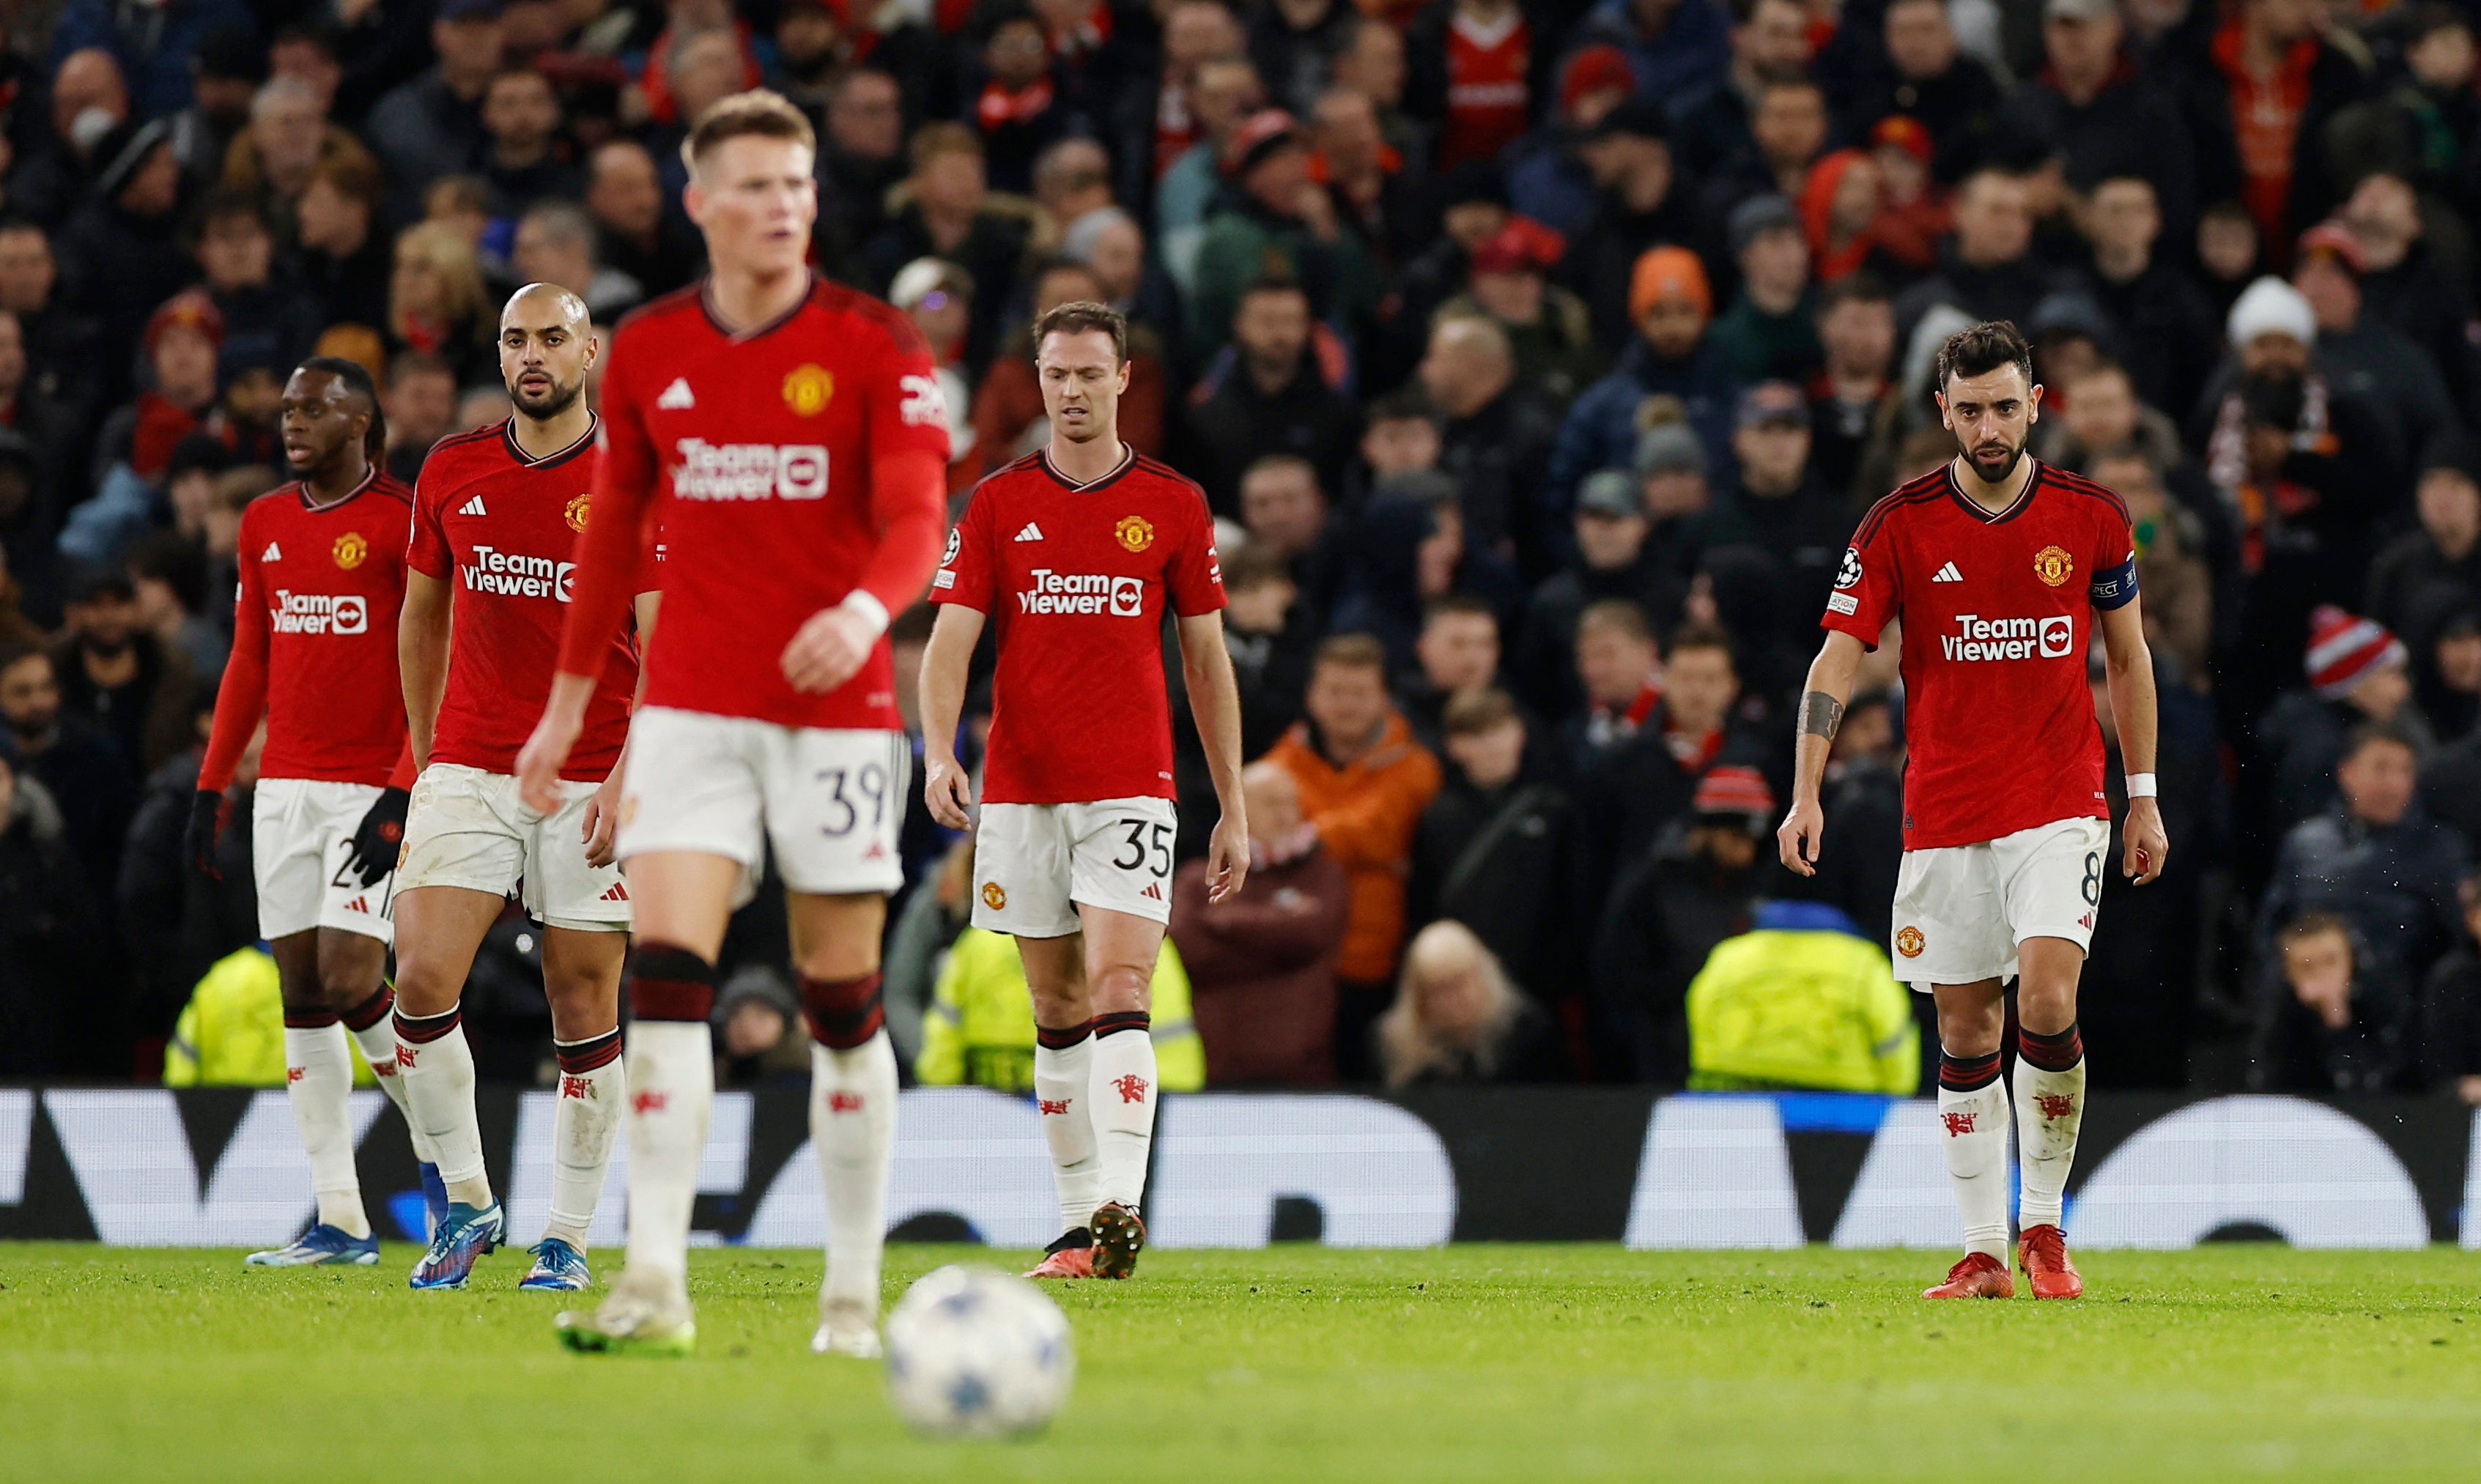 Defeat to Bayern Munich meant Manchester United finished bottom of Group A